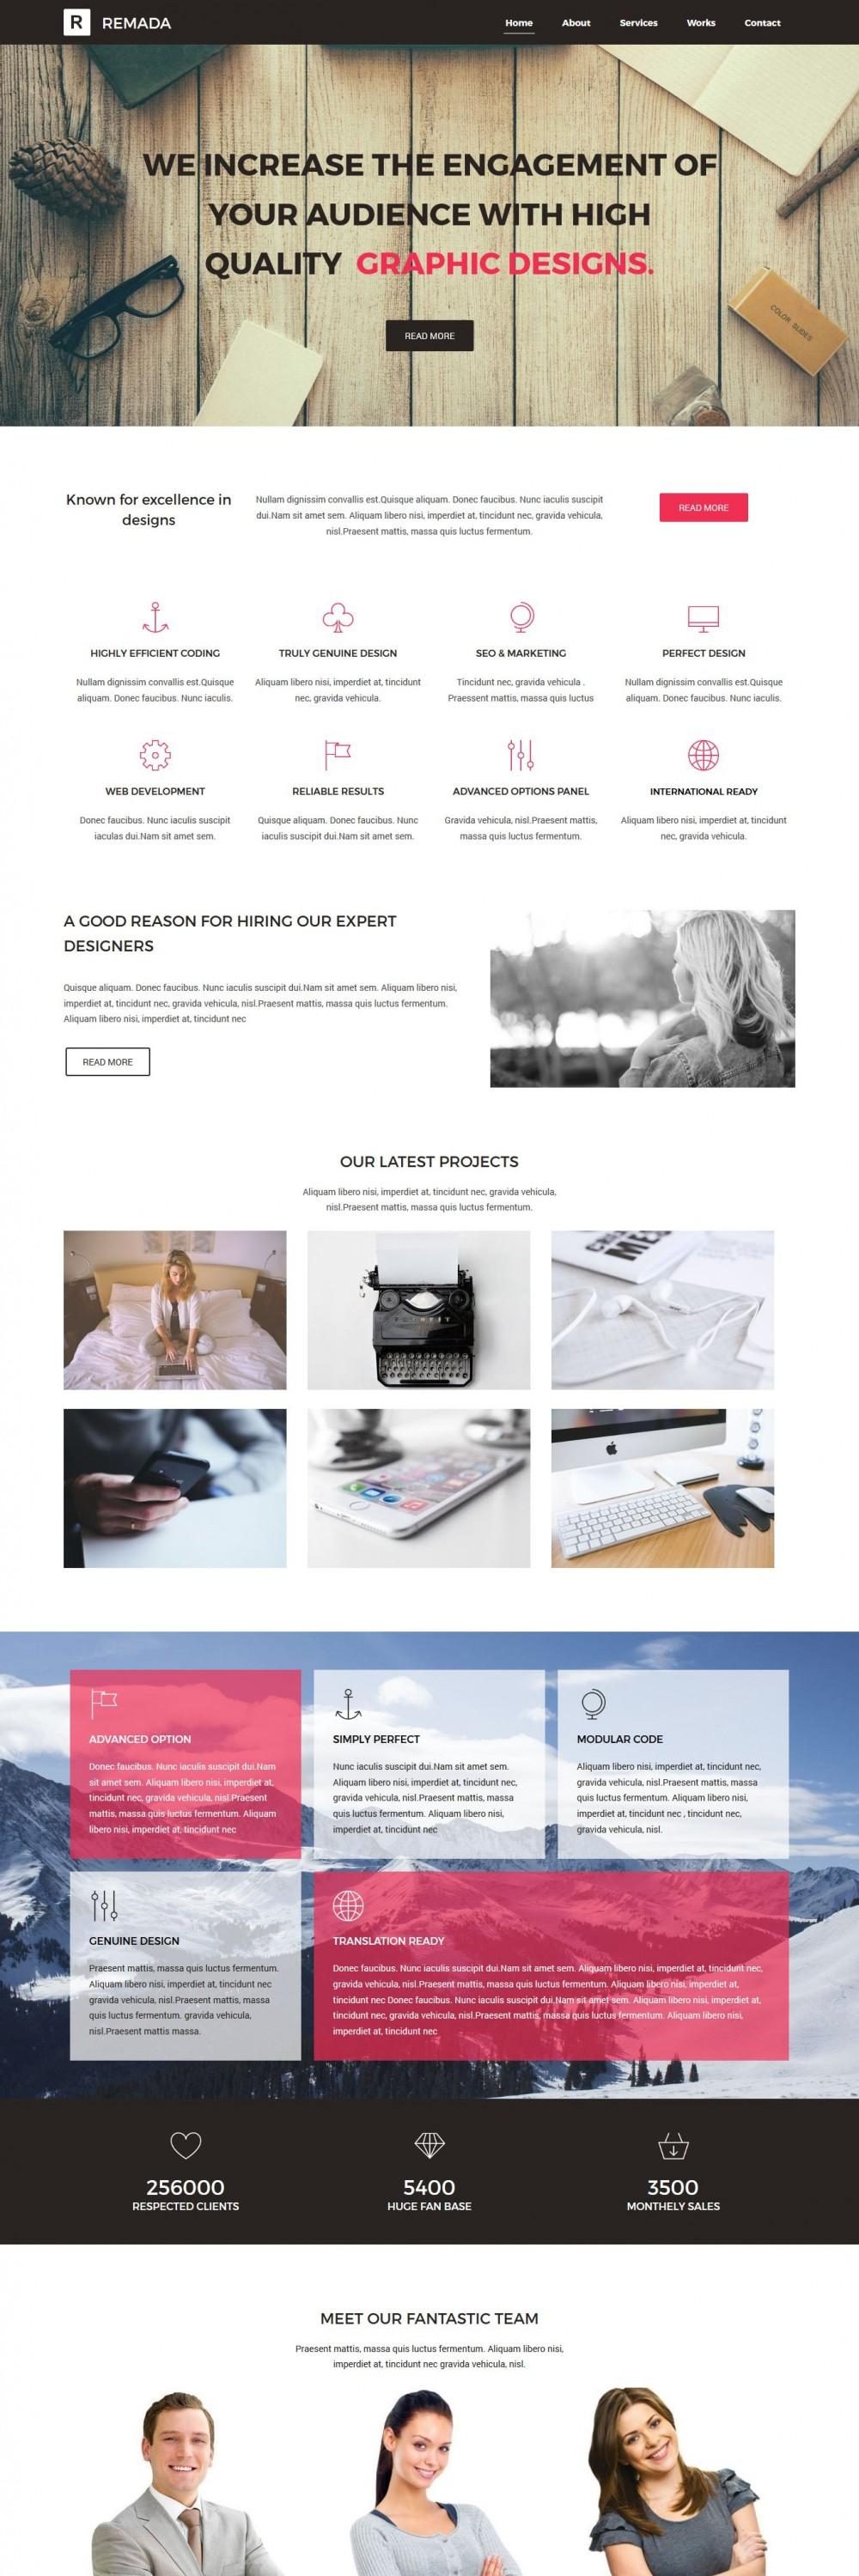 Remada - Joomla Template for Graphic And Web Design Agency